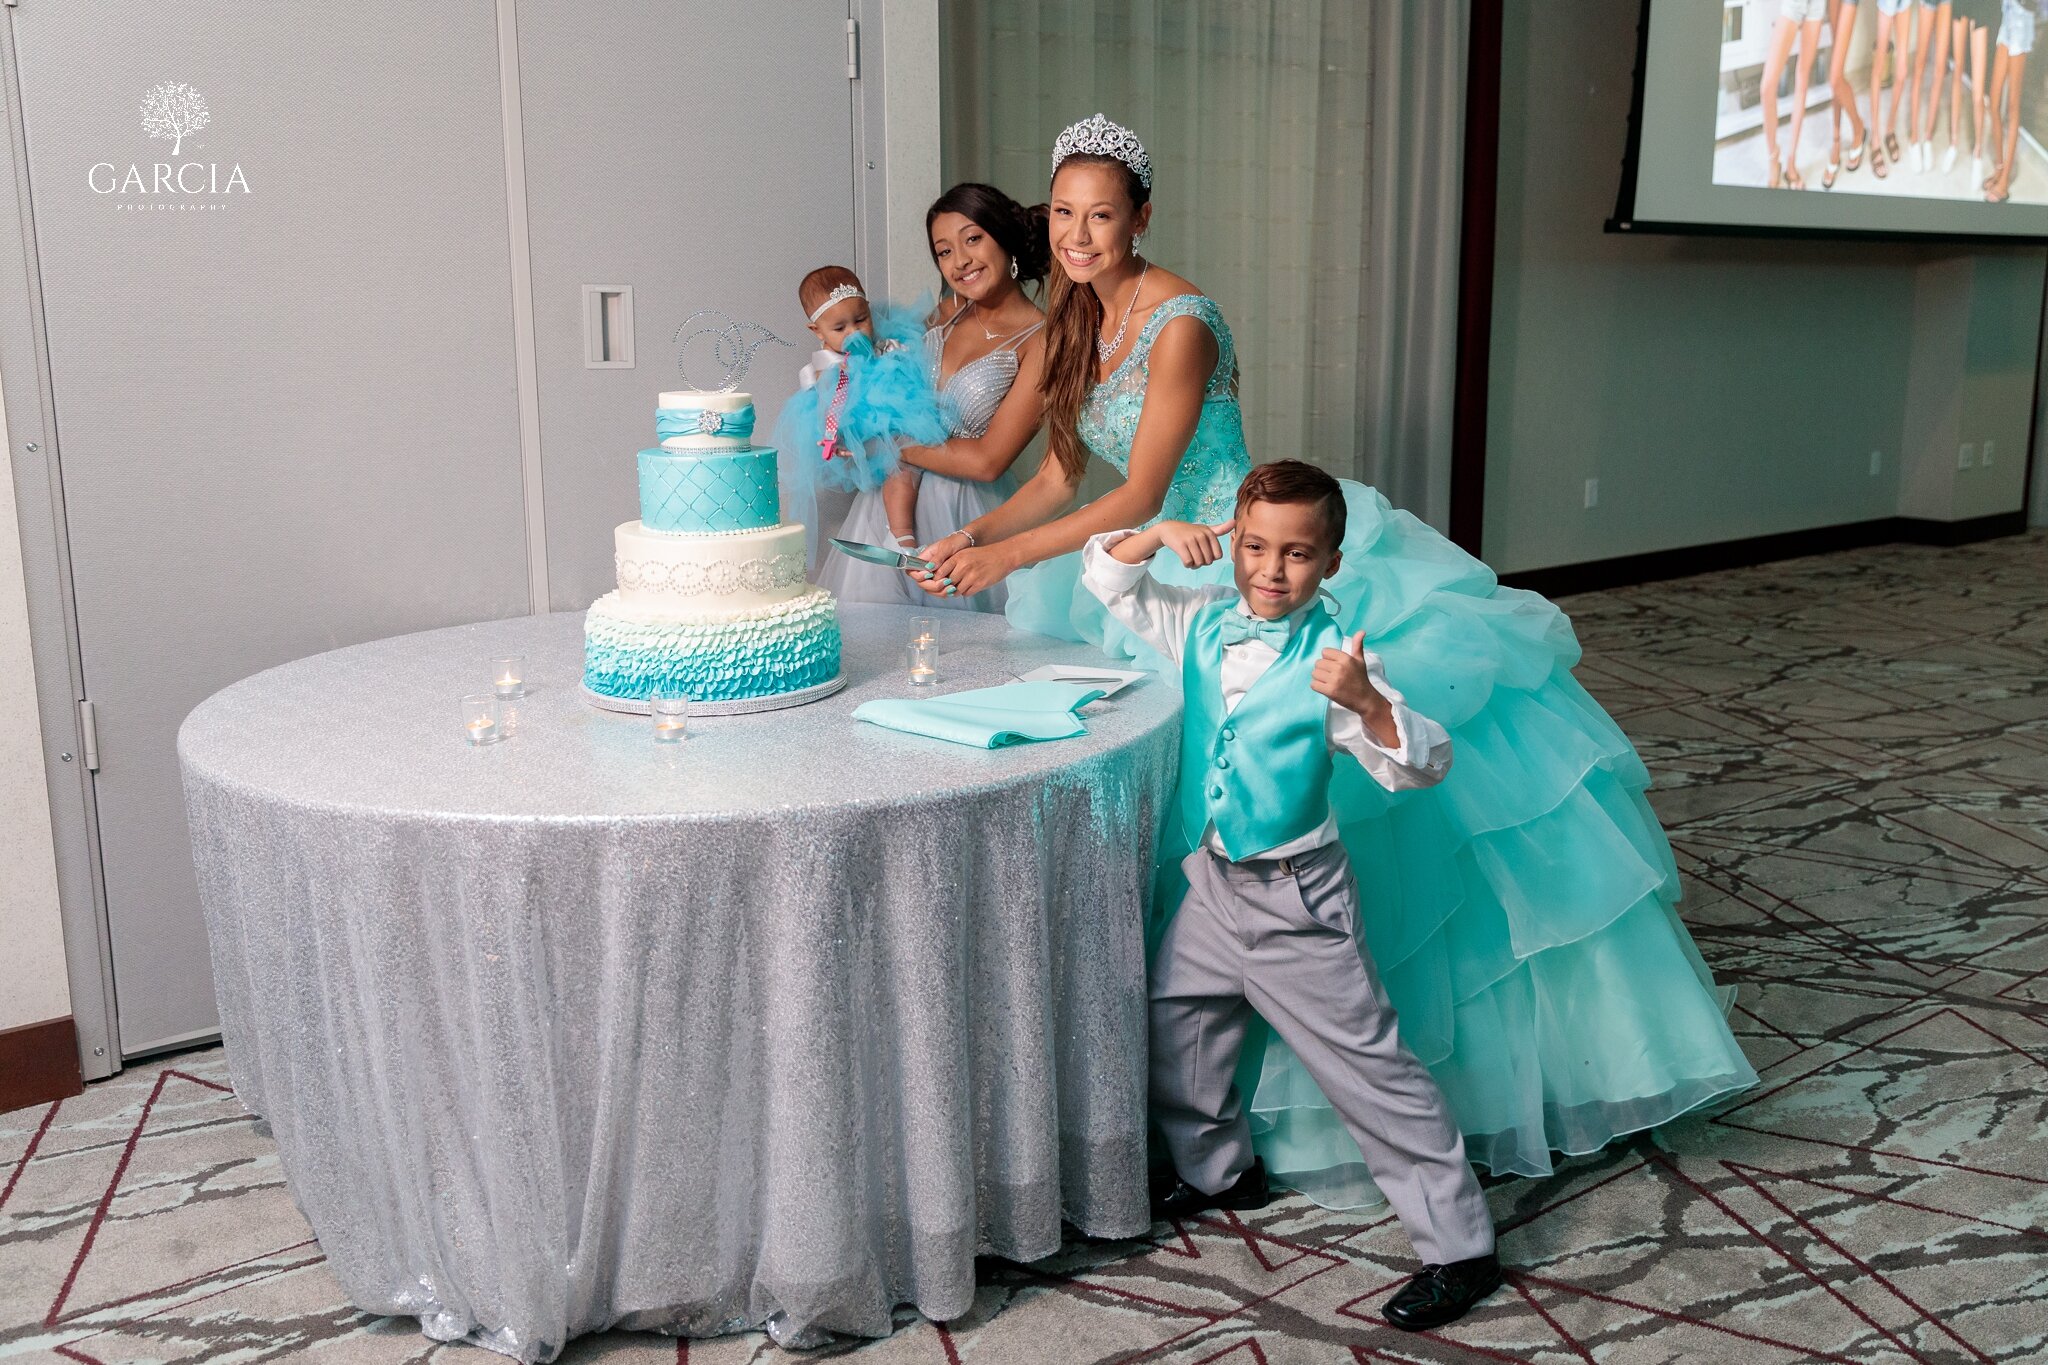 Taylor-Quince-Garcia-Photography-0180.jpg